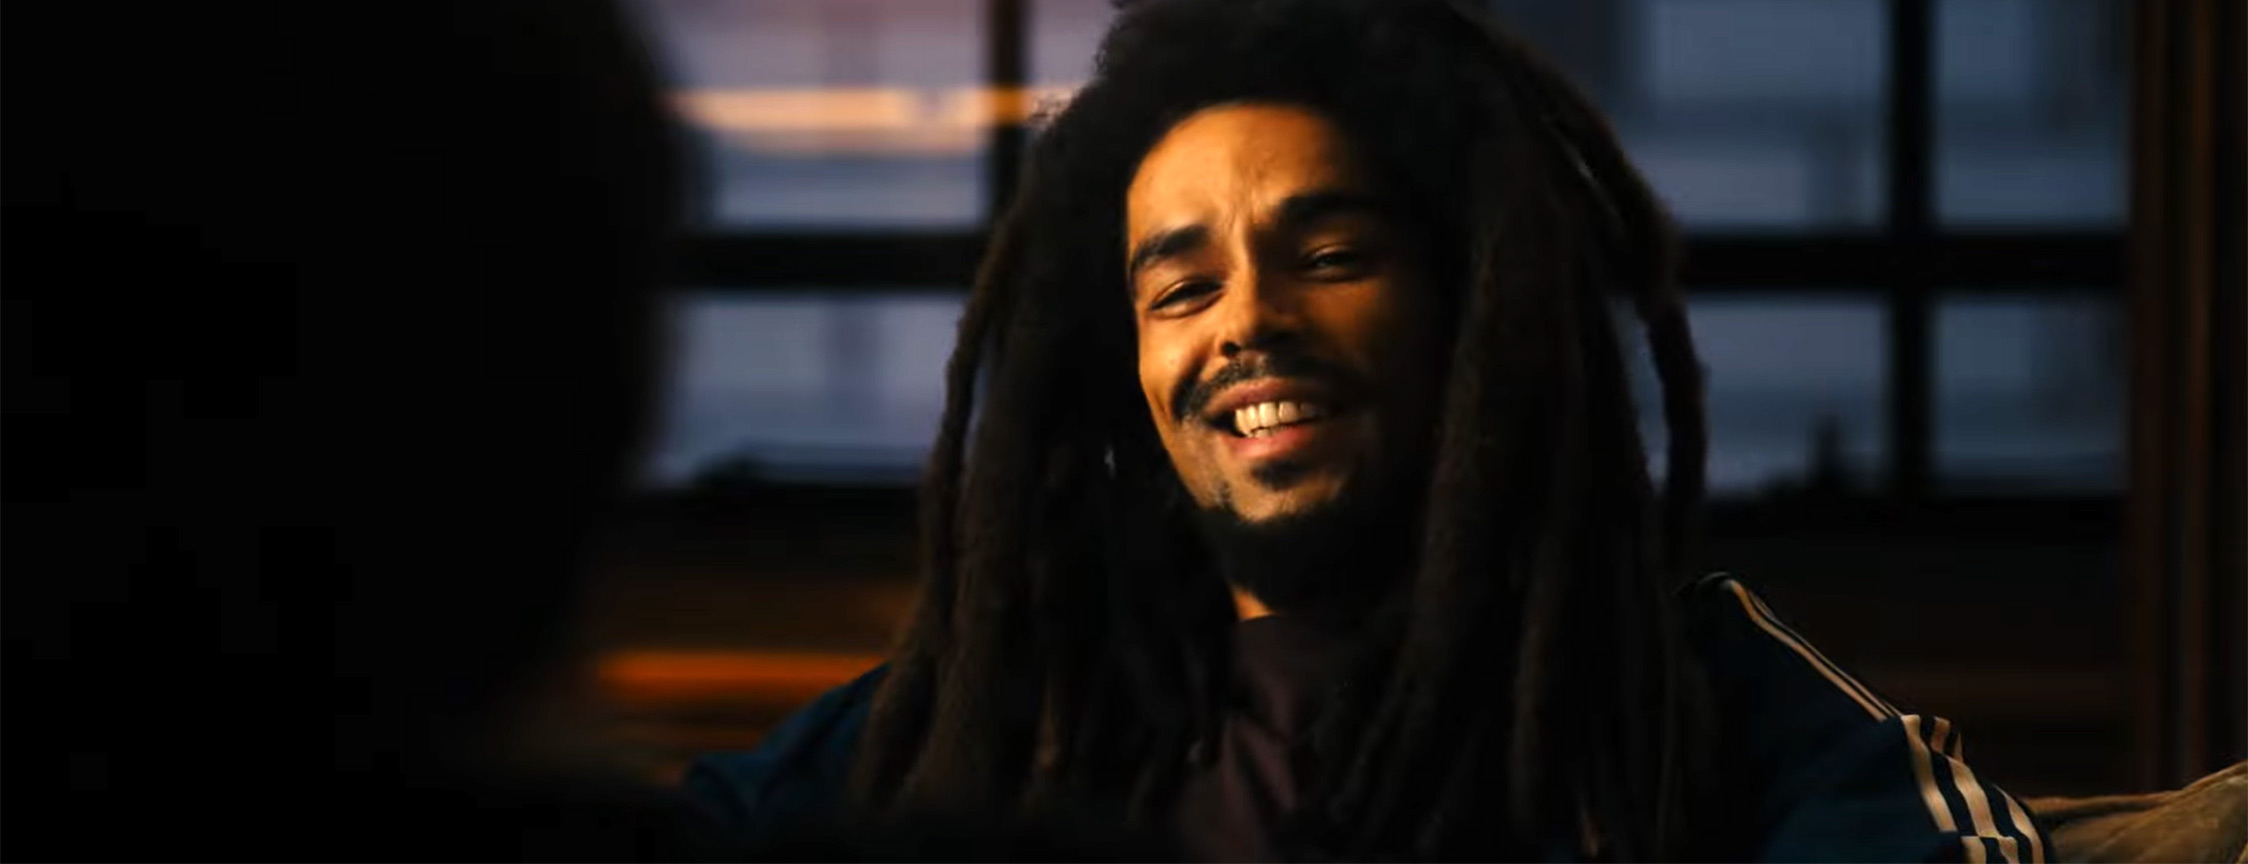 Are you ready to get up, stand up for the new Bob Marley biopic? - JB Hi-Fi